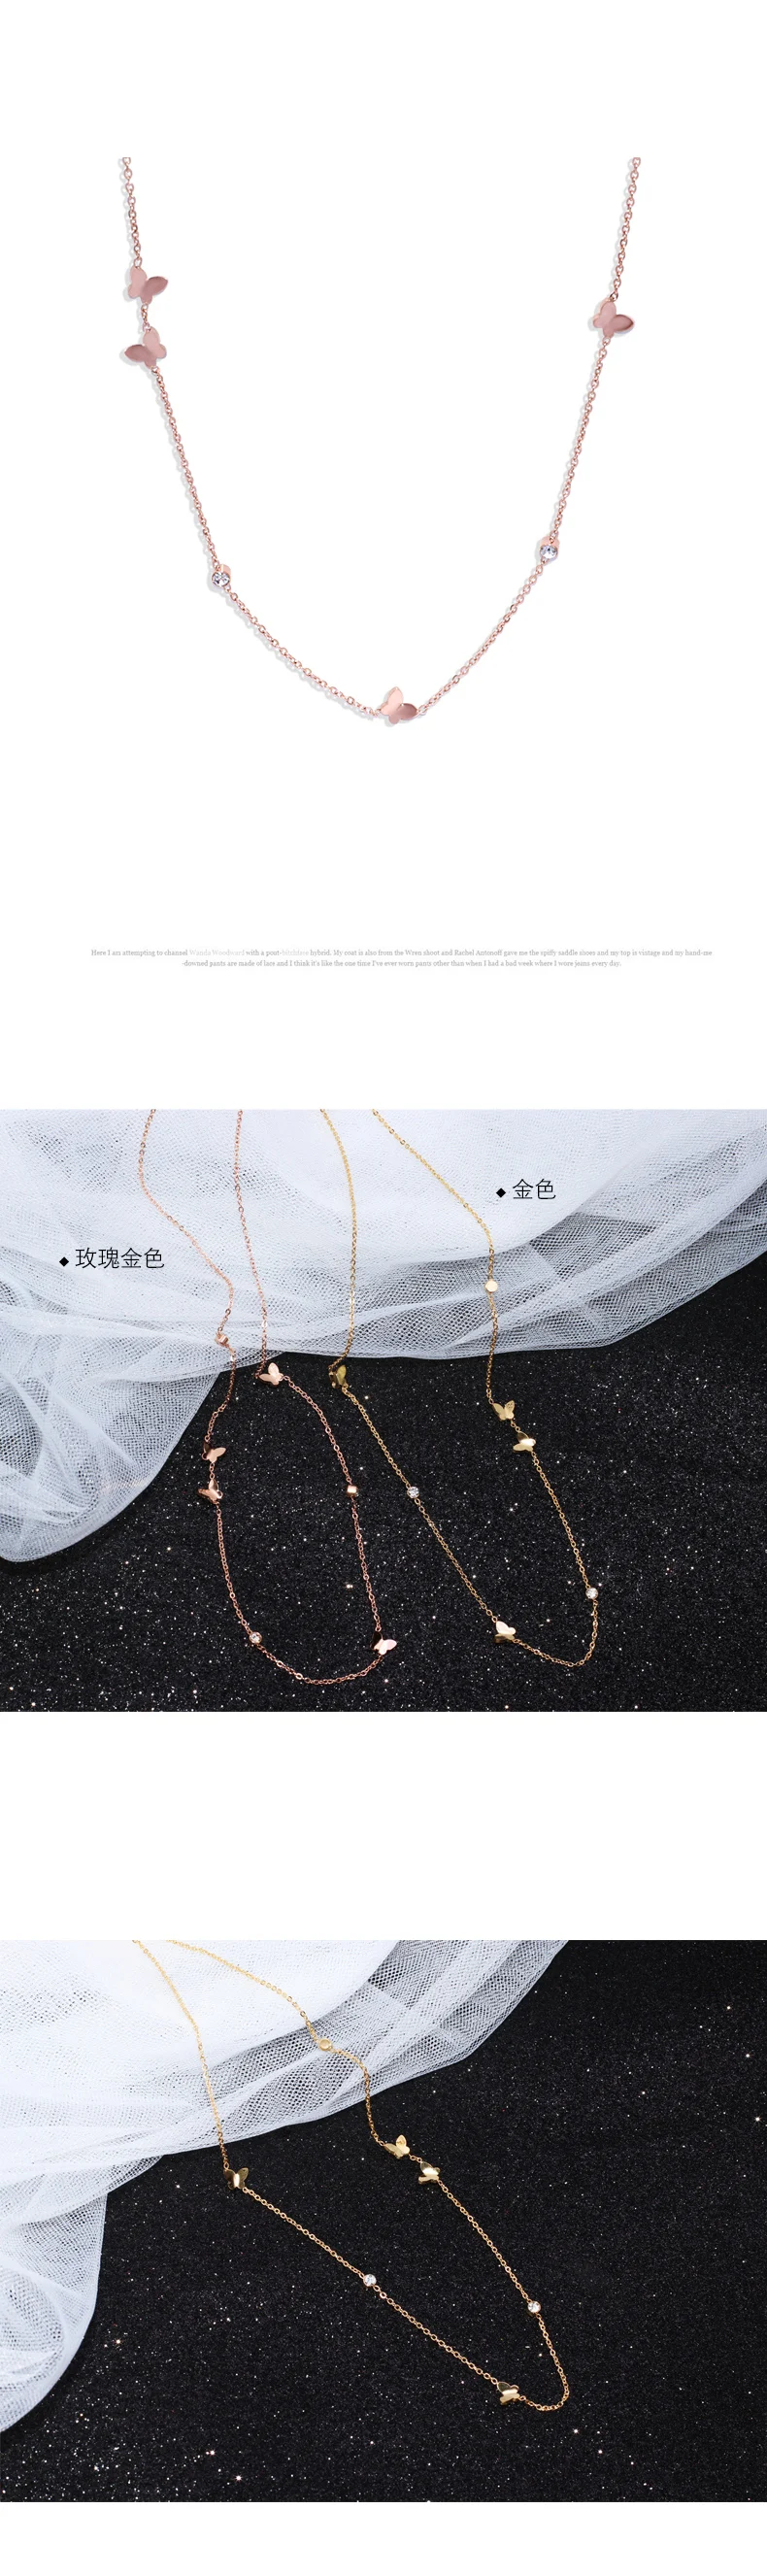 YUN RUO New Arrival Rose Gold Color Fashion Crystal Butterfly Chain Necklace Titanium Steel Jewelry Woman Gift Never Fade